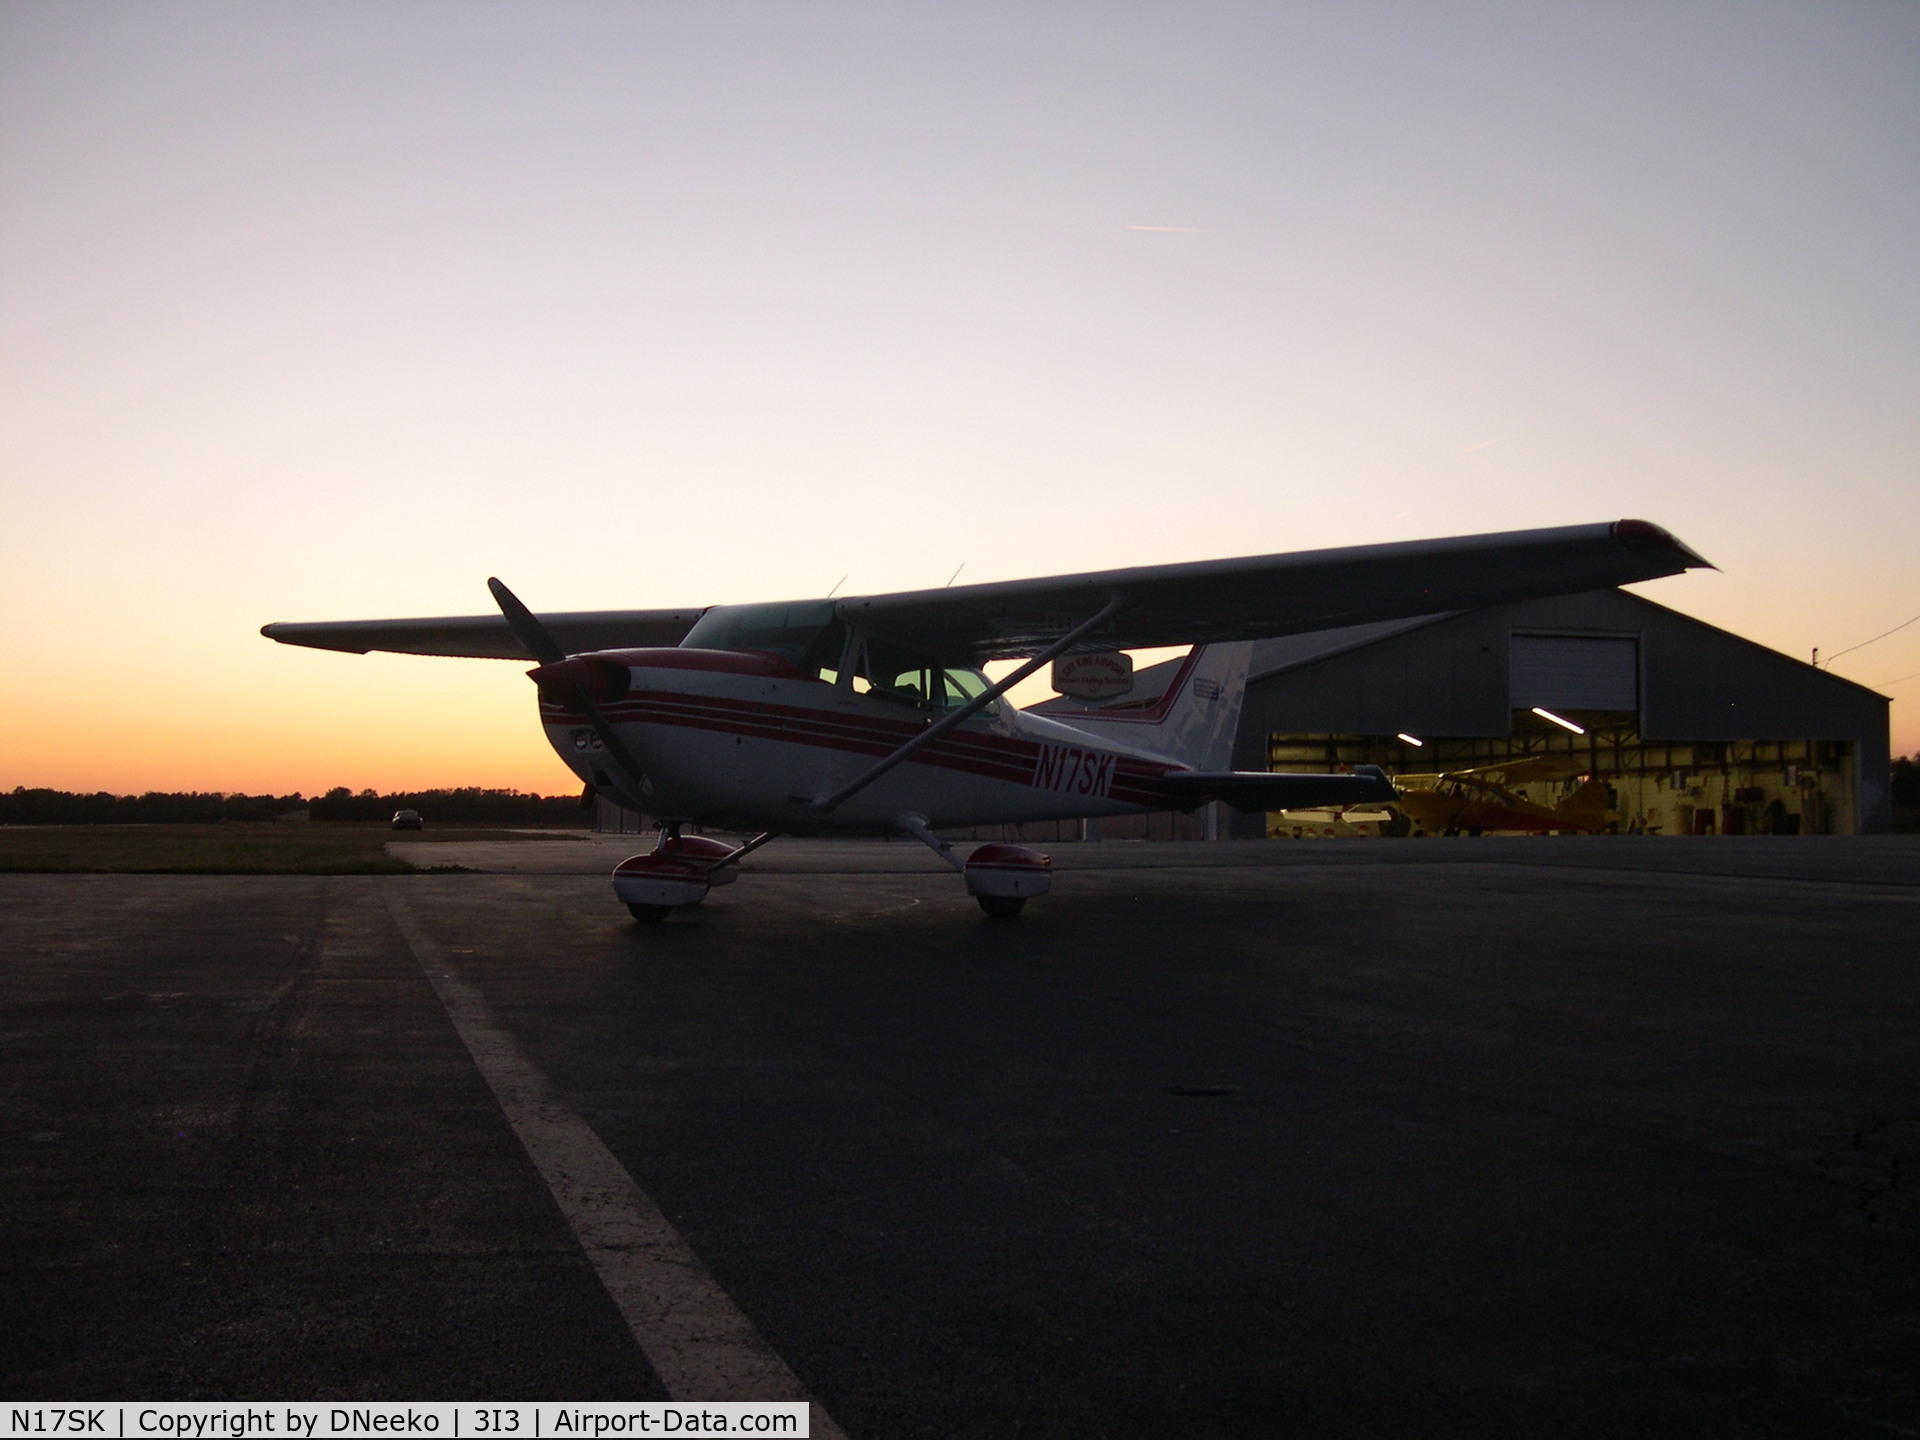 N17SK, 1980 Cessna 172N C/N 17273809, on the ramp, waiting to be put away for the night